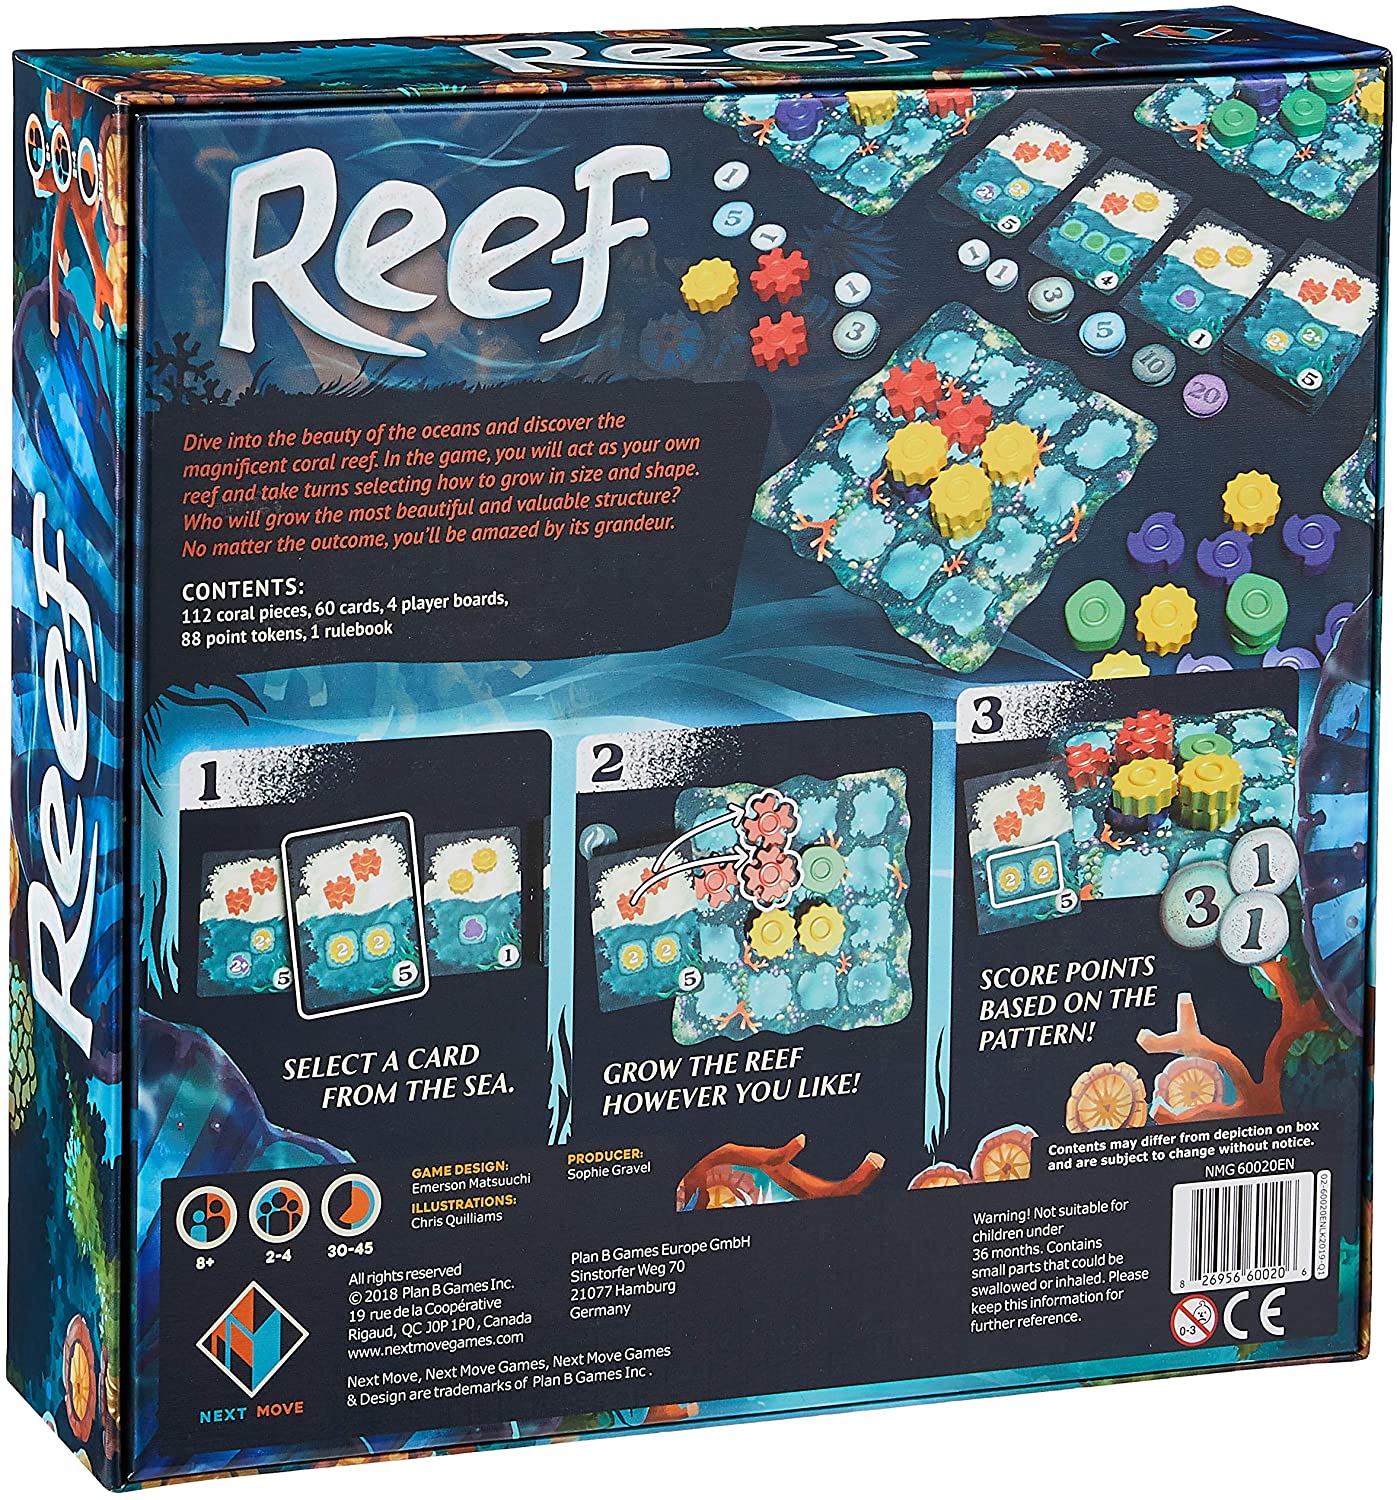 How to play Reef